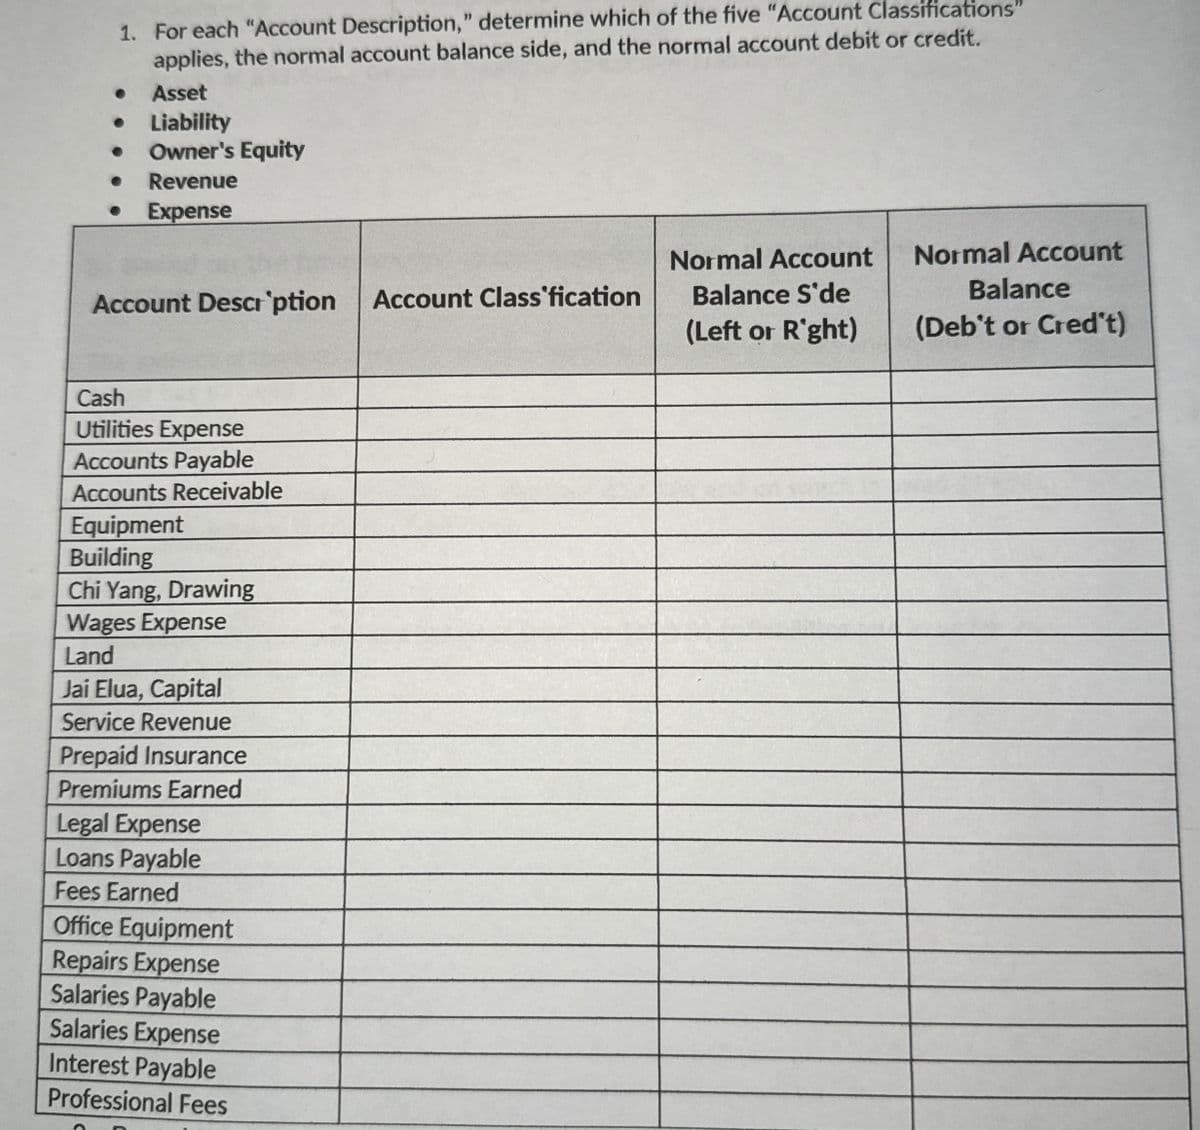 1. For each "Account Description," determine which of the five "Account Classifications"
applies, the normal account balance side, and the normal account debit or credit.
Asset
.
Liability
•
Owner's Equity
•
Revenue
Expense
Account Description
Account Class'fication
Normal Account
Balance S'de
(Left or Right)
Normal Account
Balance
(Deb't or Cred't)
Cash
Utilities Expense
Accounts Payable
Accounts Receivable
Equipment
Building
Chi Yang, Drawing
Wages Expense
Land
Jai Elua, Capital
Service Revenue
Prepaid Insurance
Premiums Earned
Legal Expense
Loans Payable
Fees Earned
Office Equipment
Repairs Expense
Salaries Payable
Salaries Expense
Interest Payable
Professional Fees